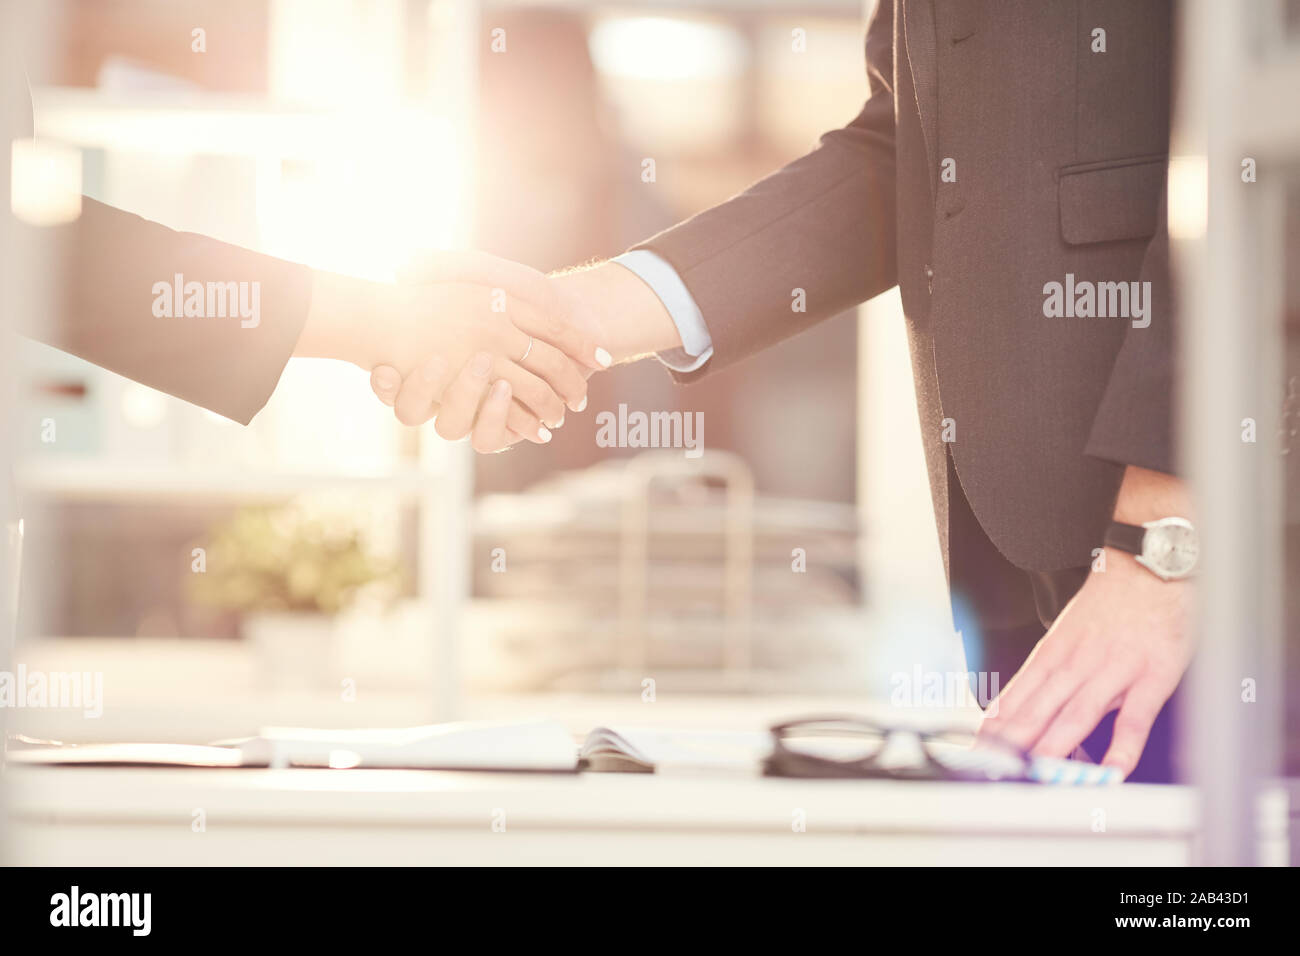 Closeup of unrecognizable businessmen shaking hands during business meeting in office, copy space Stock Photo